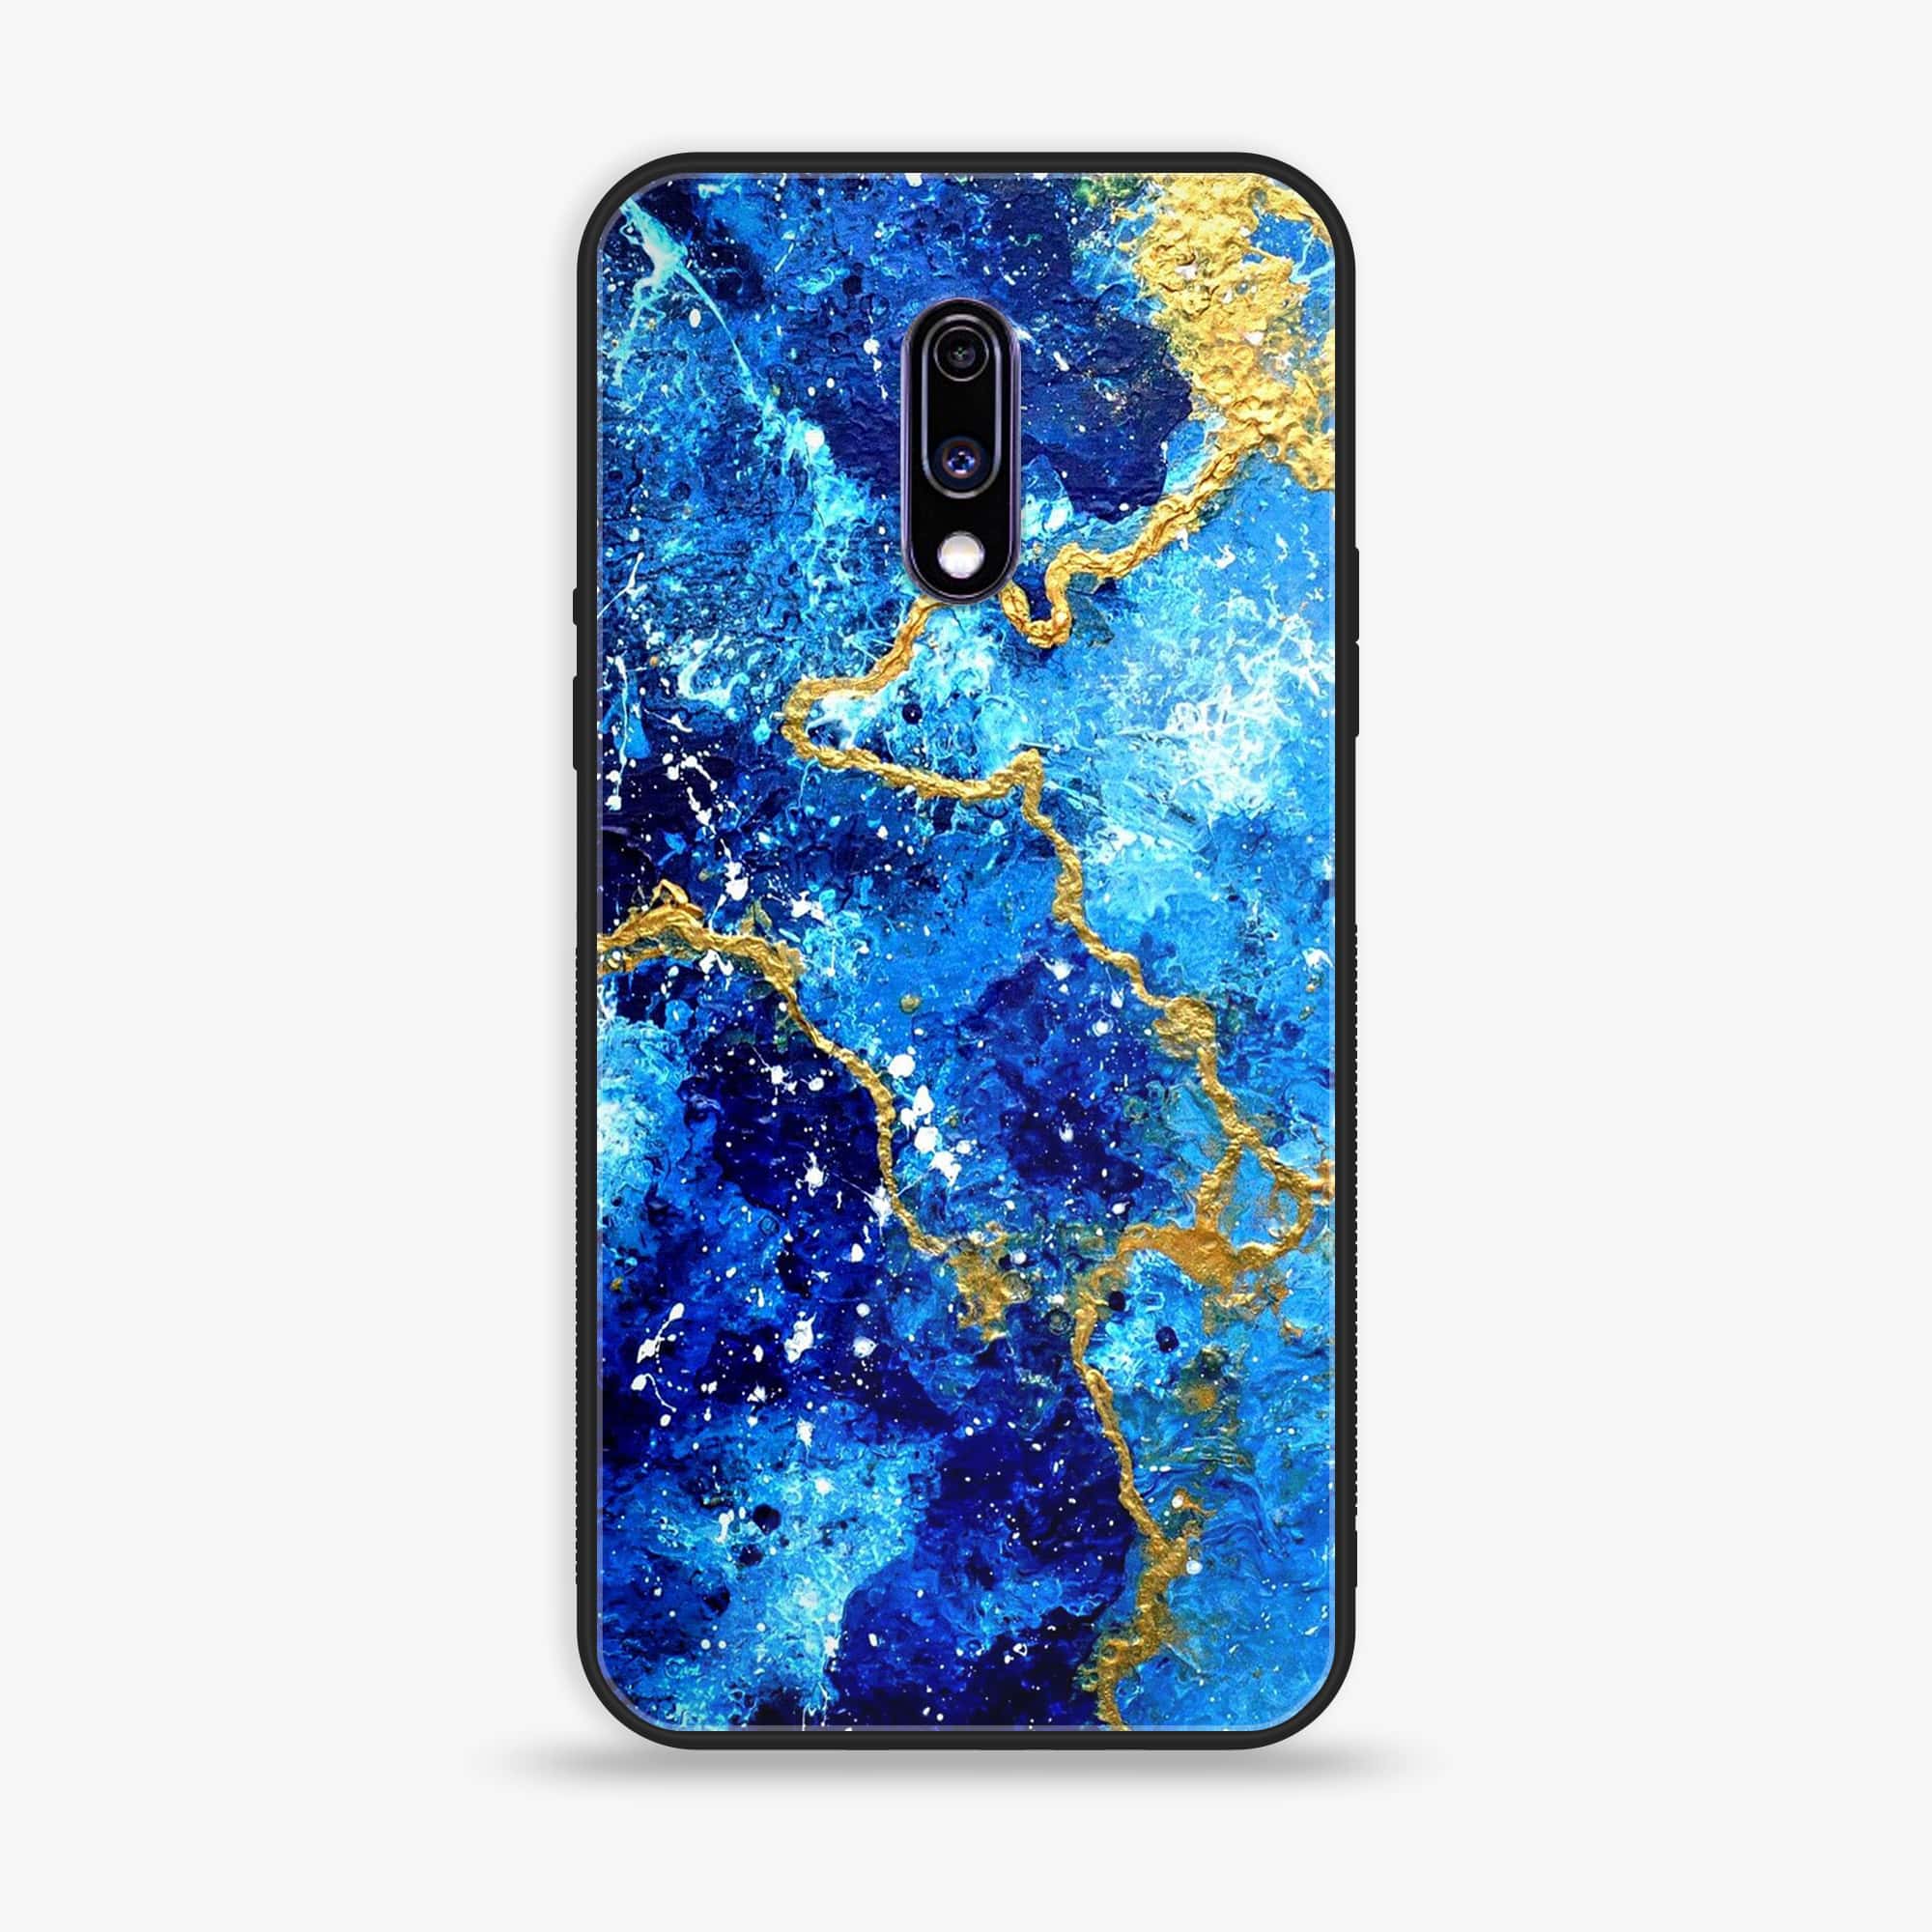 OnePlus 7 - Blue Marble Series V 2.0 - Premium Printed Glass soft Bumper shock Proof Case